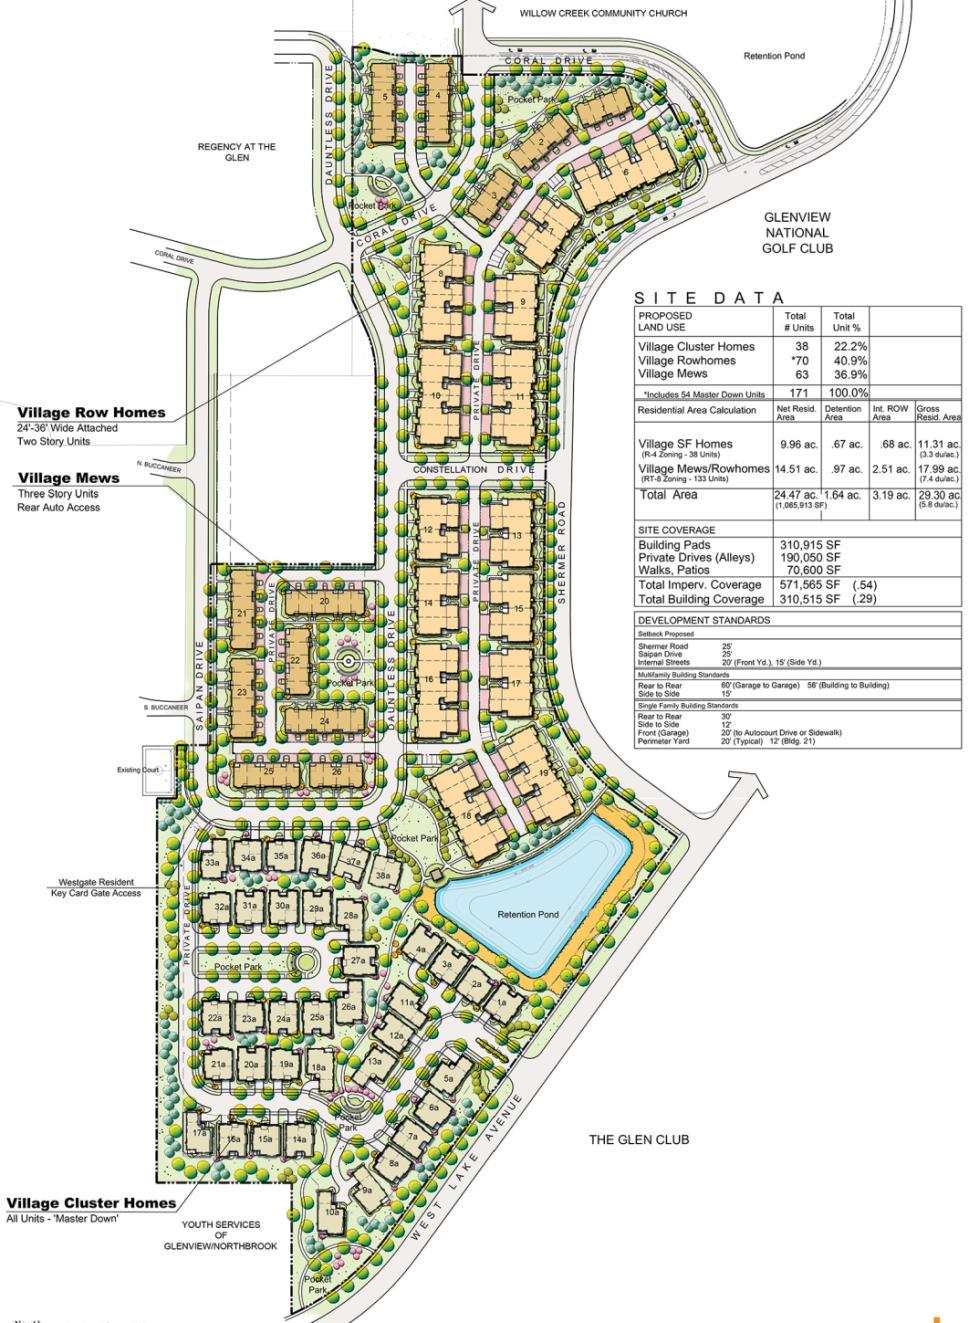 7 171 residential units -